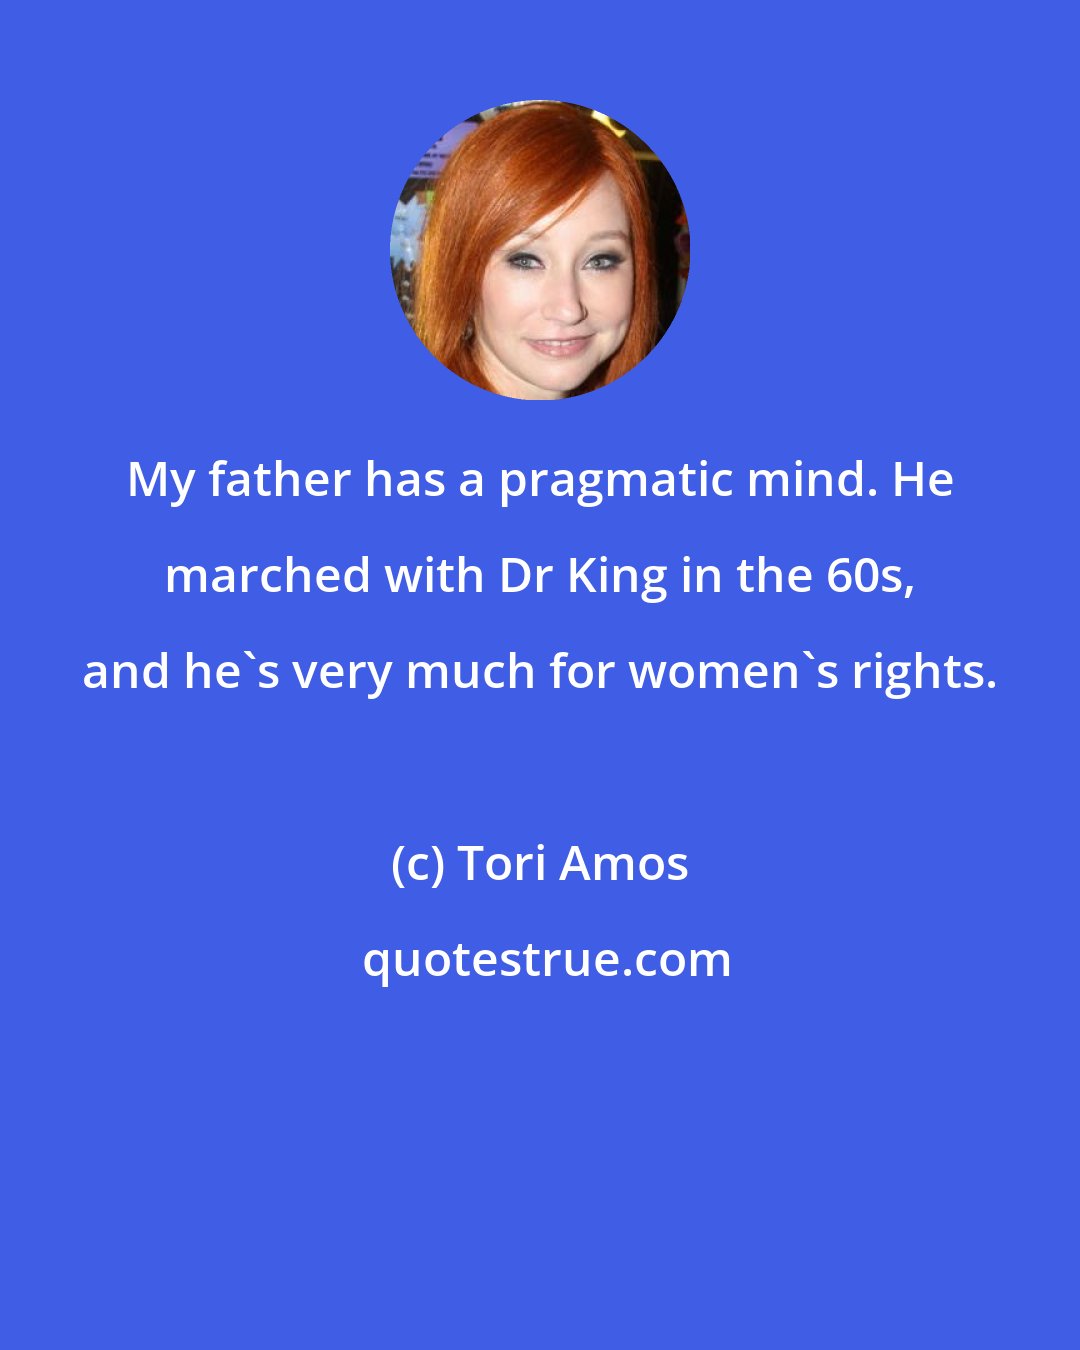 Tori Amos: My father has a pragmatic mind. He marched with Dr King in the 60s, and he's very much for women's rights.